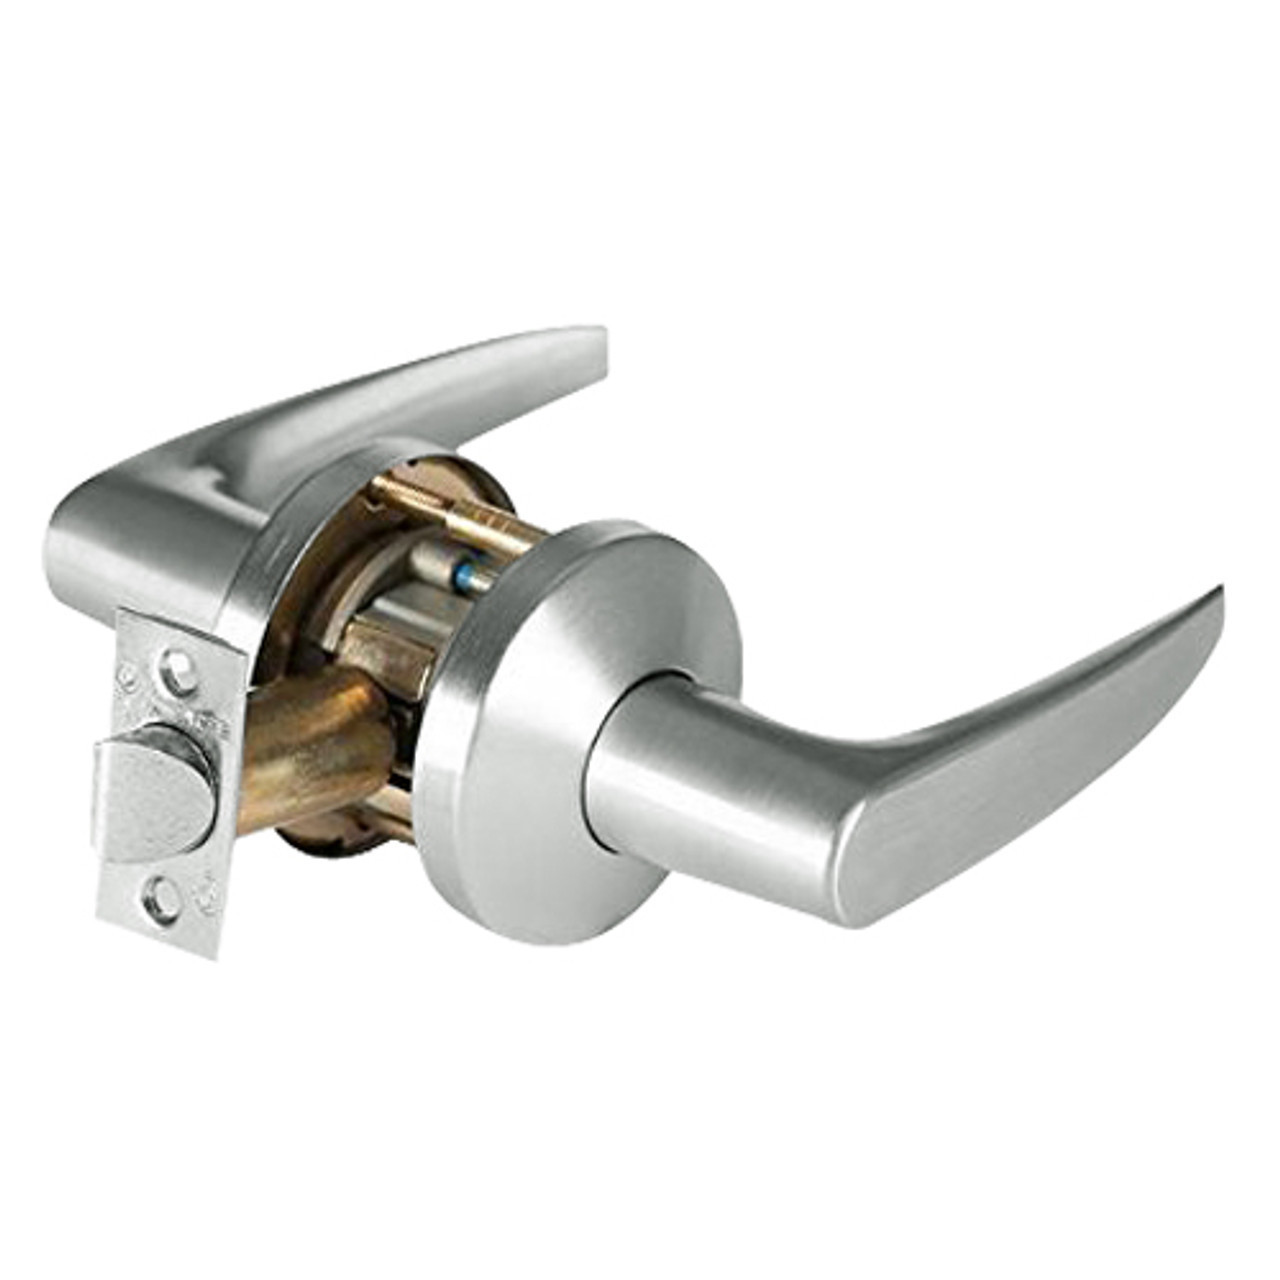 9K50N16KSTK618LM Best 9K Series Passage Heavy Duty Cylindrical Lever Locks with Curved Without Return Lever Design in Bright Nickel